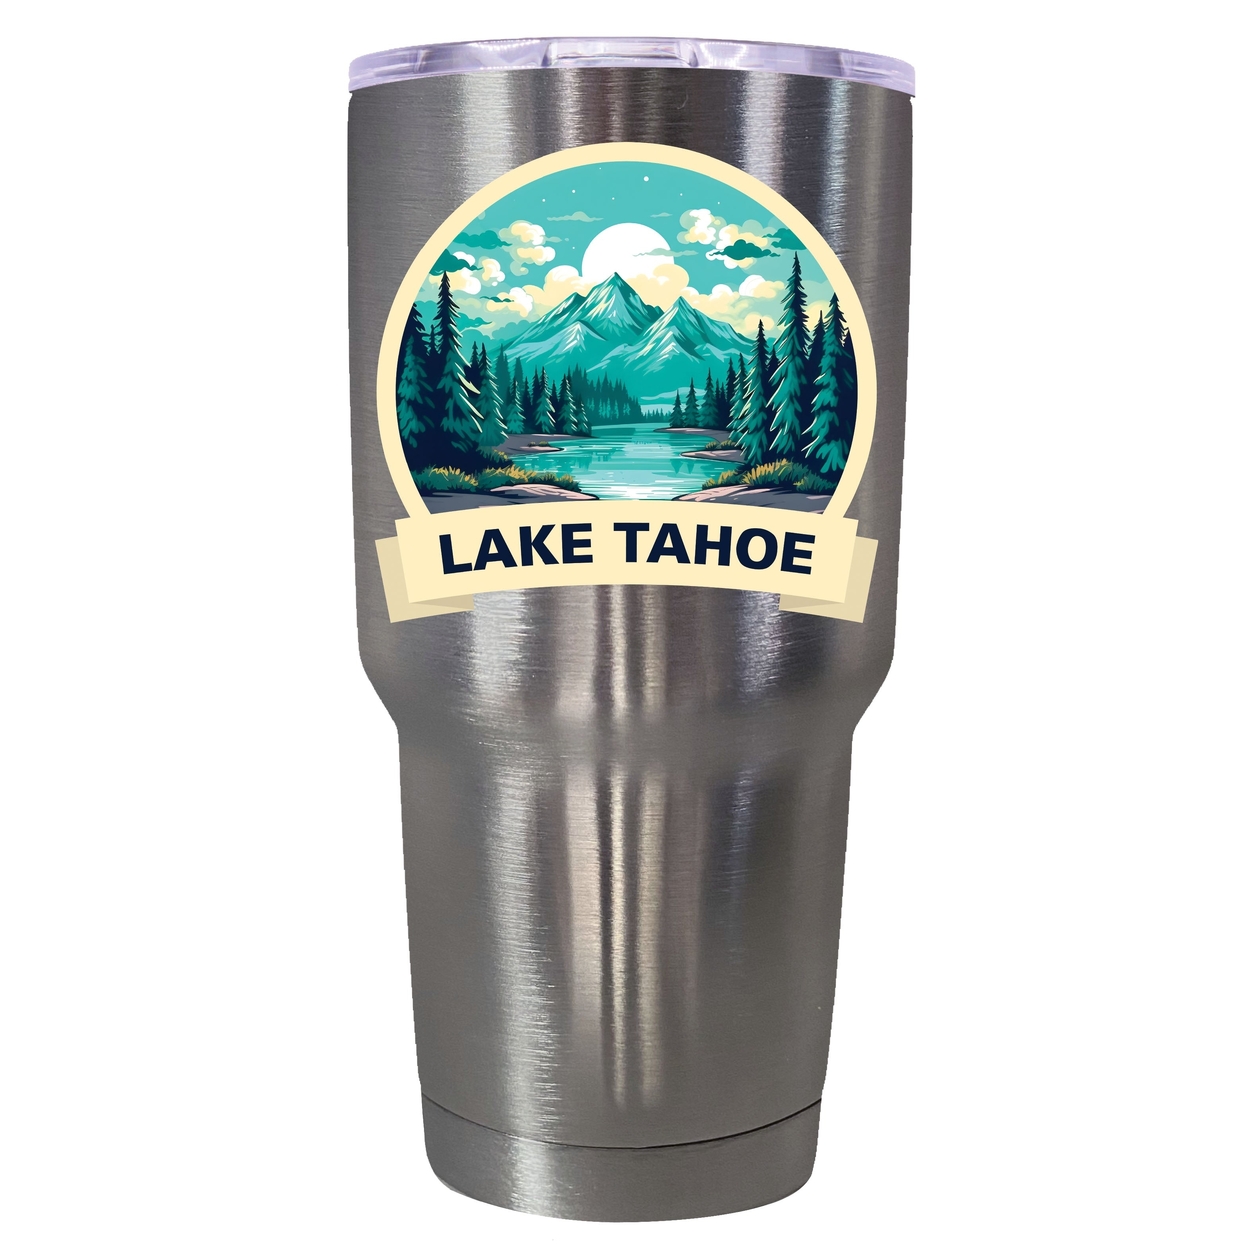 Lake Tahoe California Souvenir 24 Oz Insulated Stainless Steel Tumbler - Rose Gold,,2-Pack